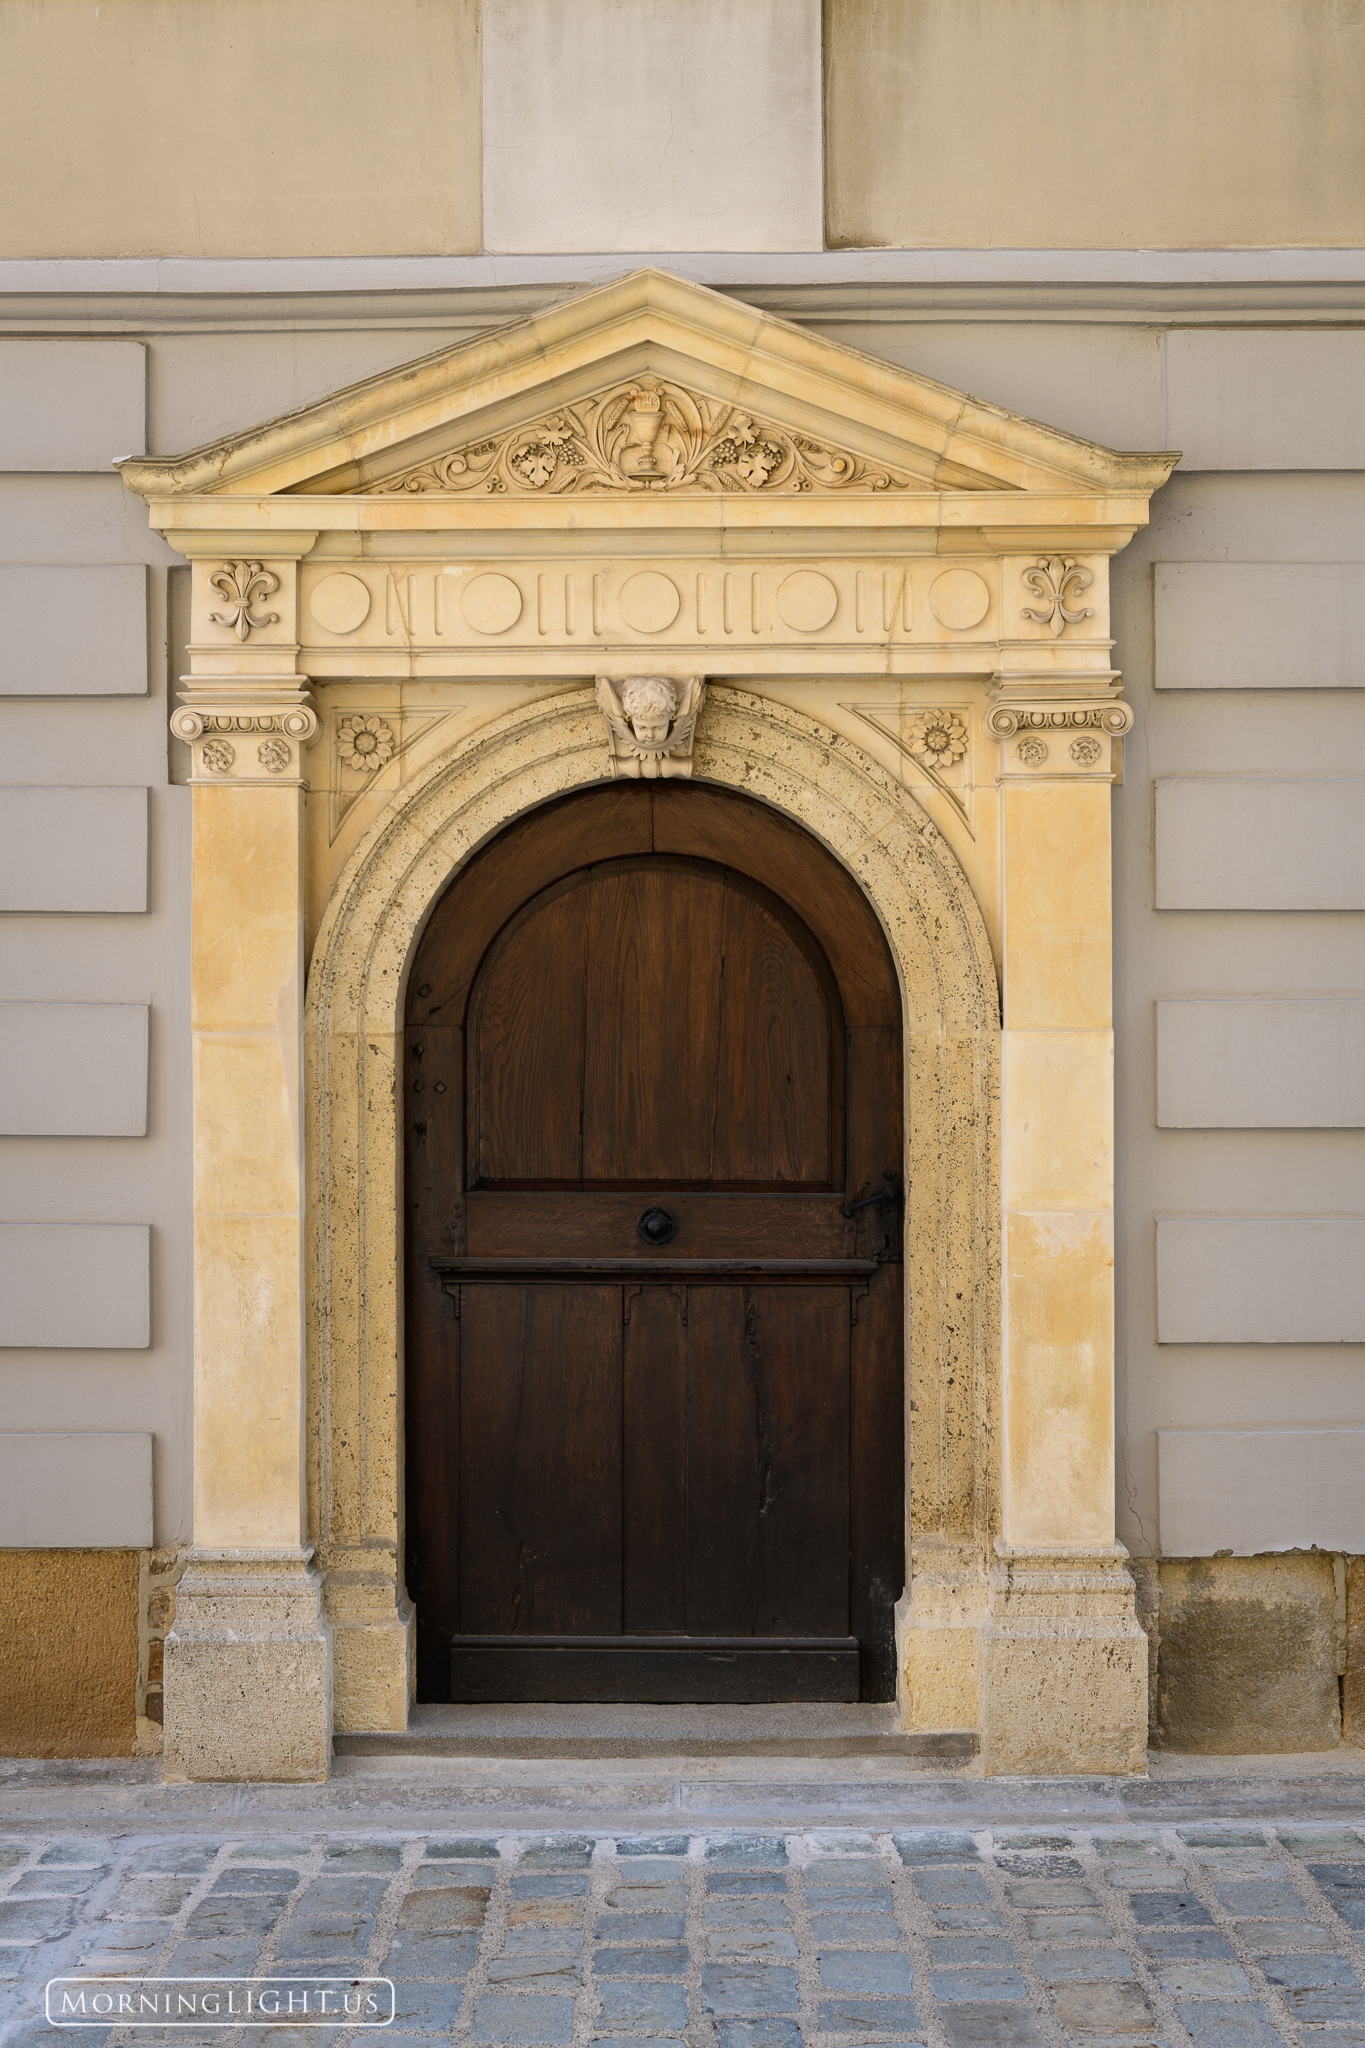 A gorgeous entrance to one of the buildings next to the main cathedral in Zagreb, Croatia.